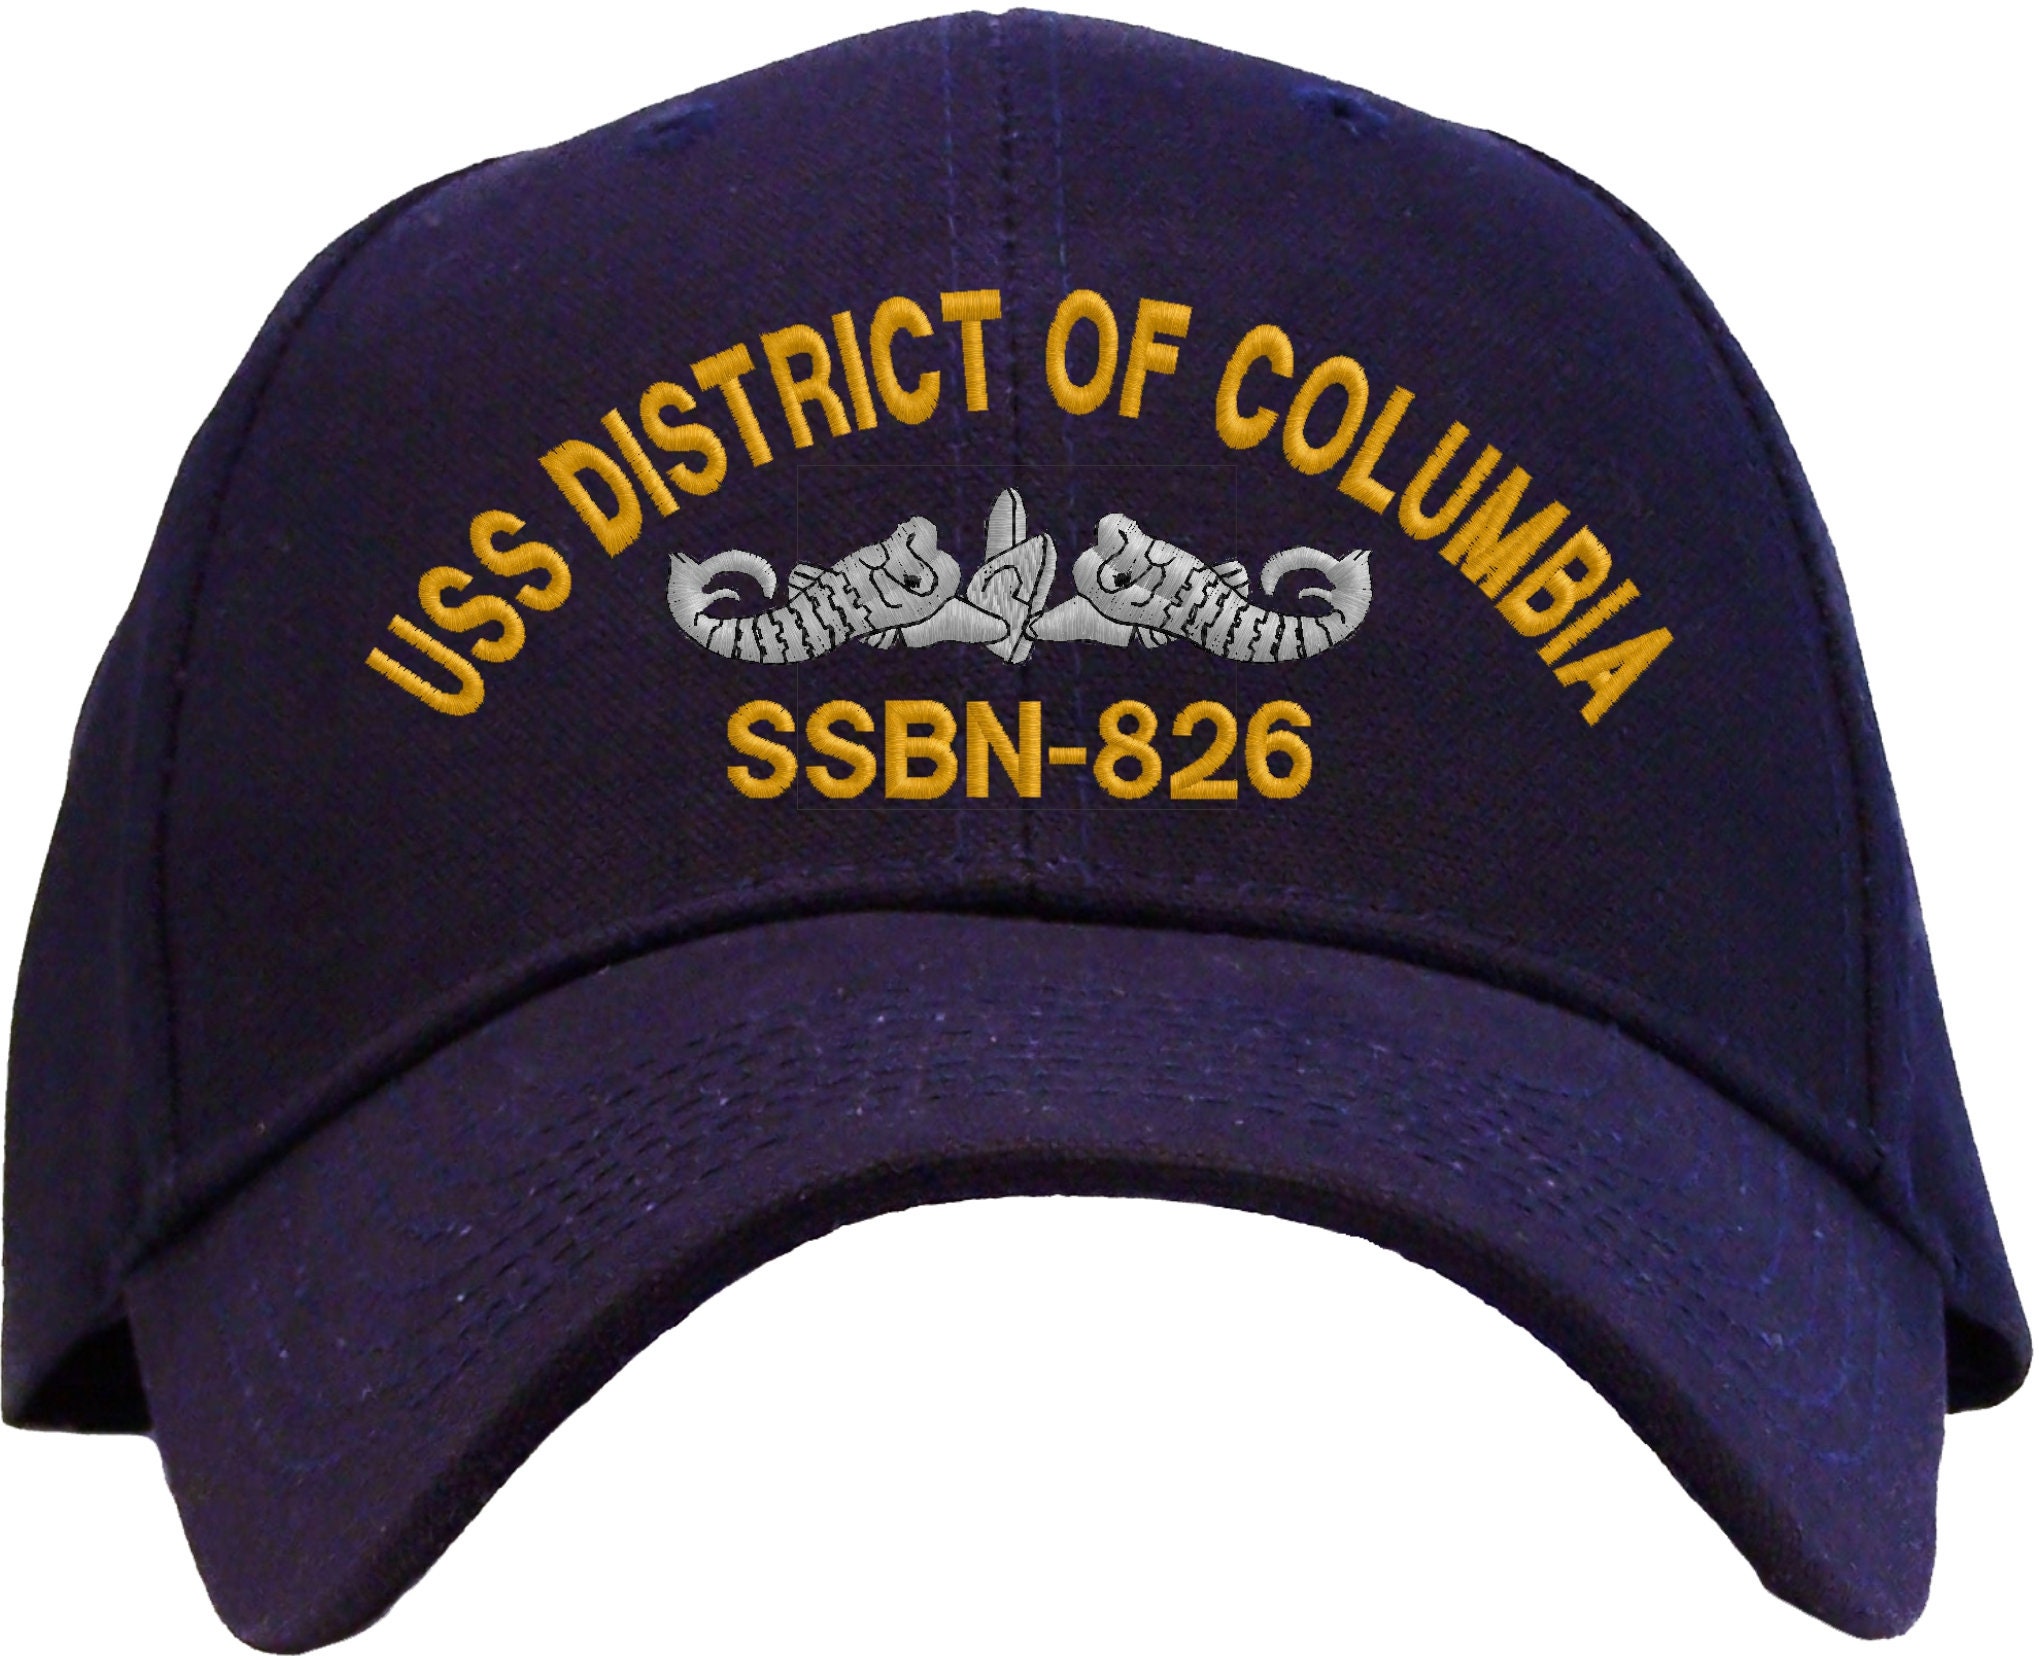 USS District of Columbia SSBN-826 Embroidered Baseball Cap Great Gift for  Veteran, Active Duty Available in 3 Colors 